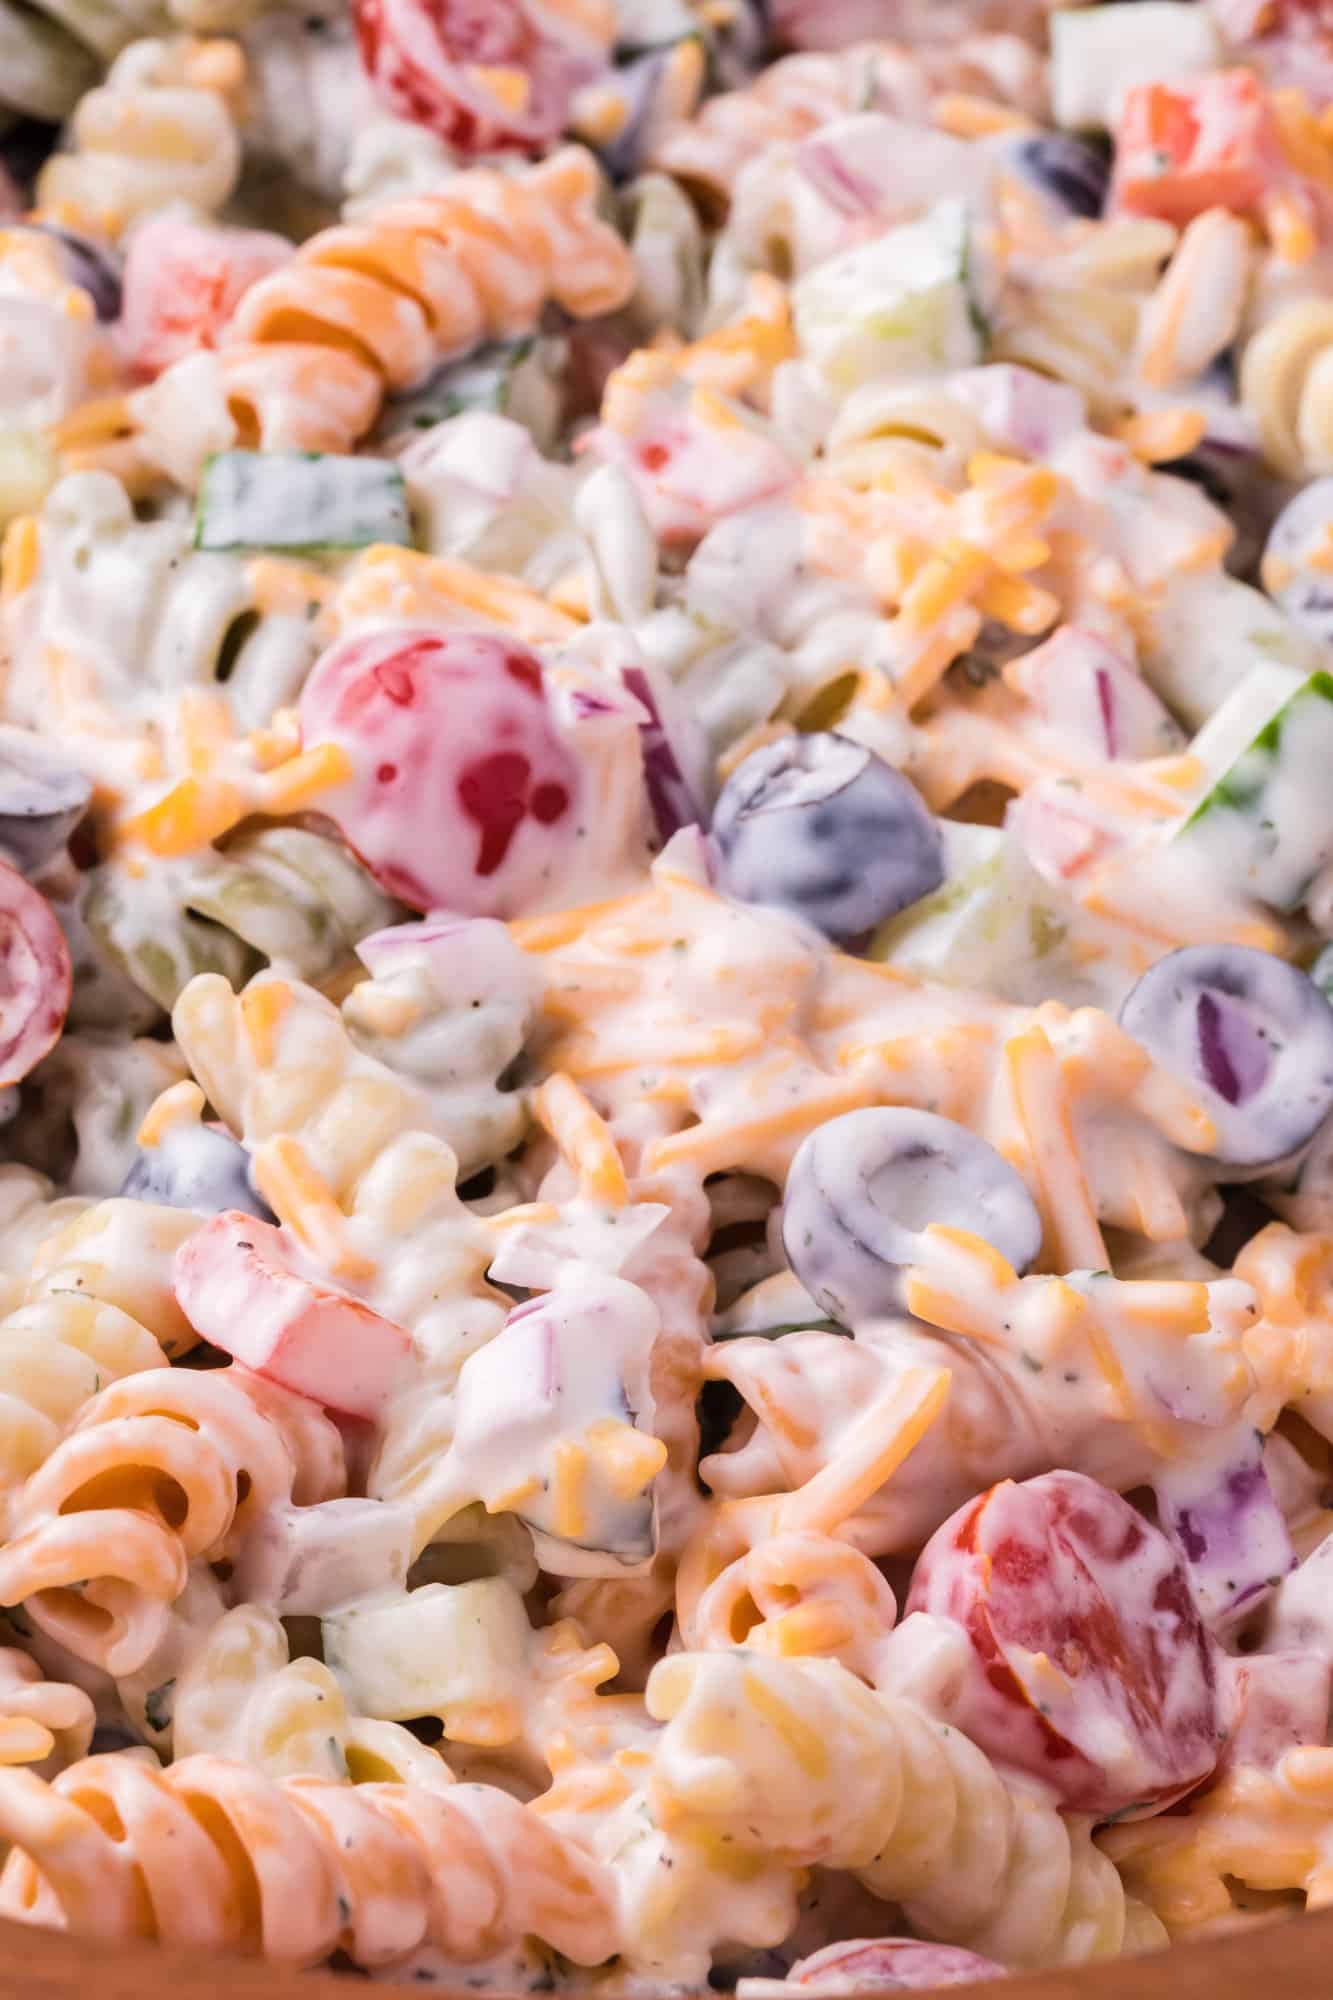 Ranch pasta salad, close up, showing ingredients coated in dressing.